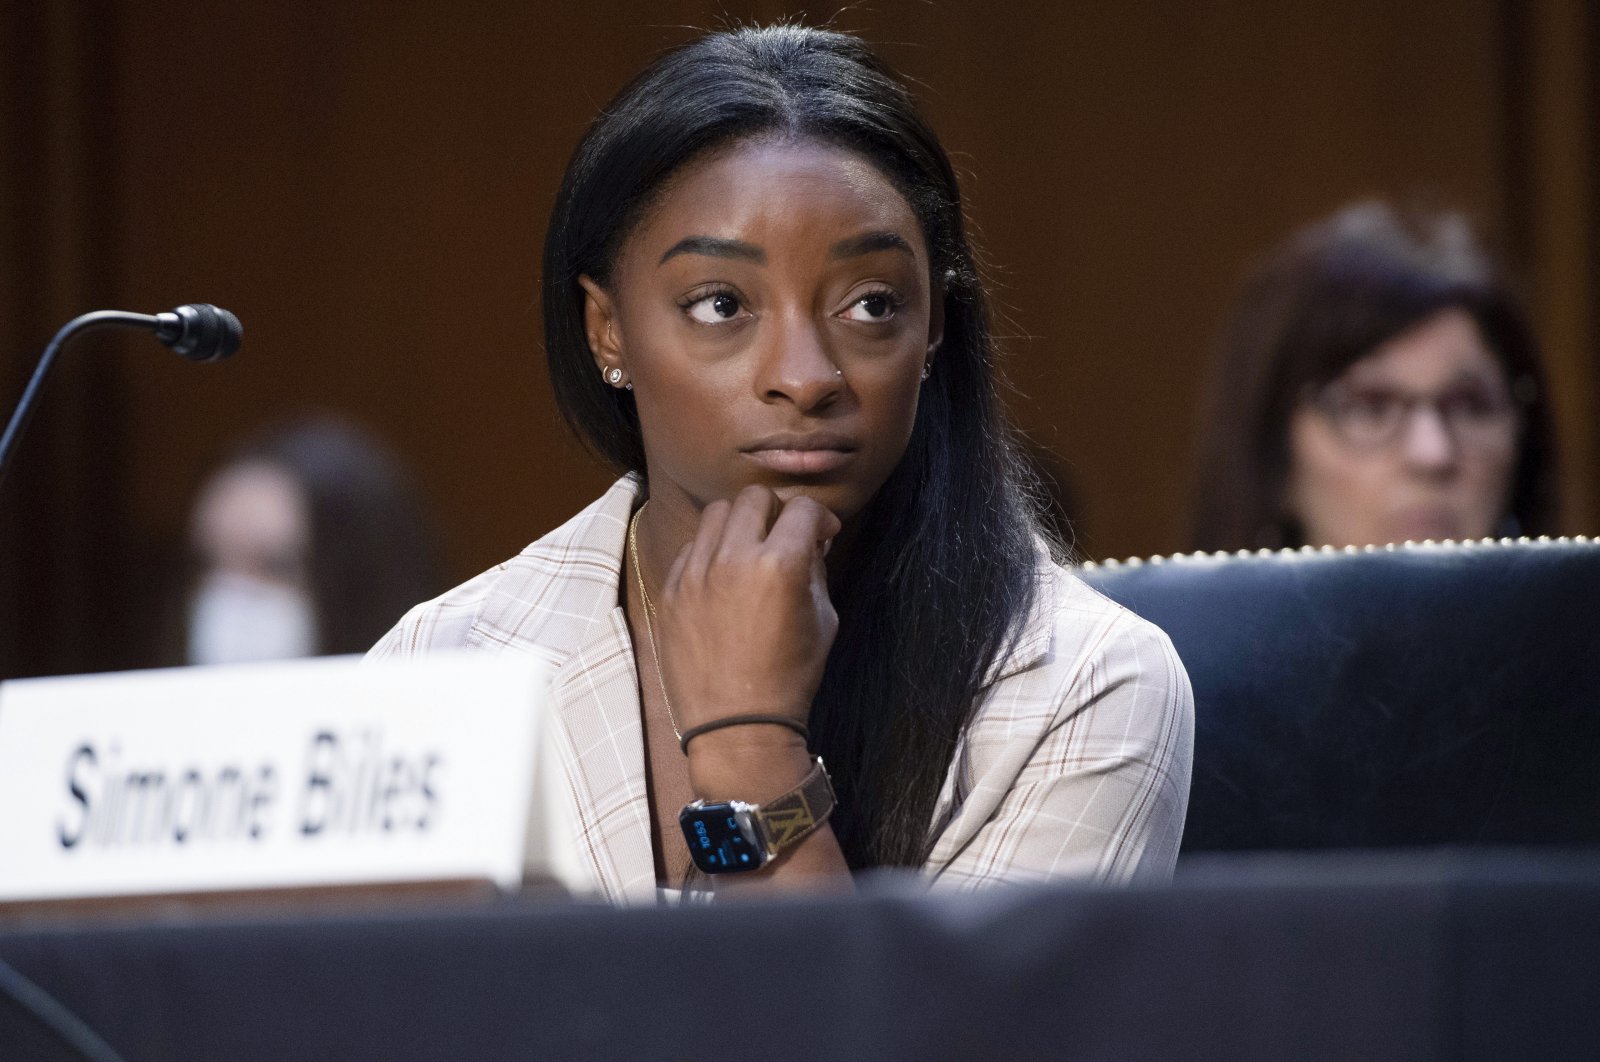 United States Olympic gymnast Simone Biles testifies during a Senate Judiciary hearing about the Inspector General's report on the FBI's handling of the Larry Nassar investigation on Capitol Hill, in Washington, D.C., U.S., Sept. 15, 2021. (Pool via AP)